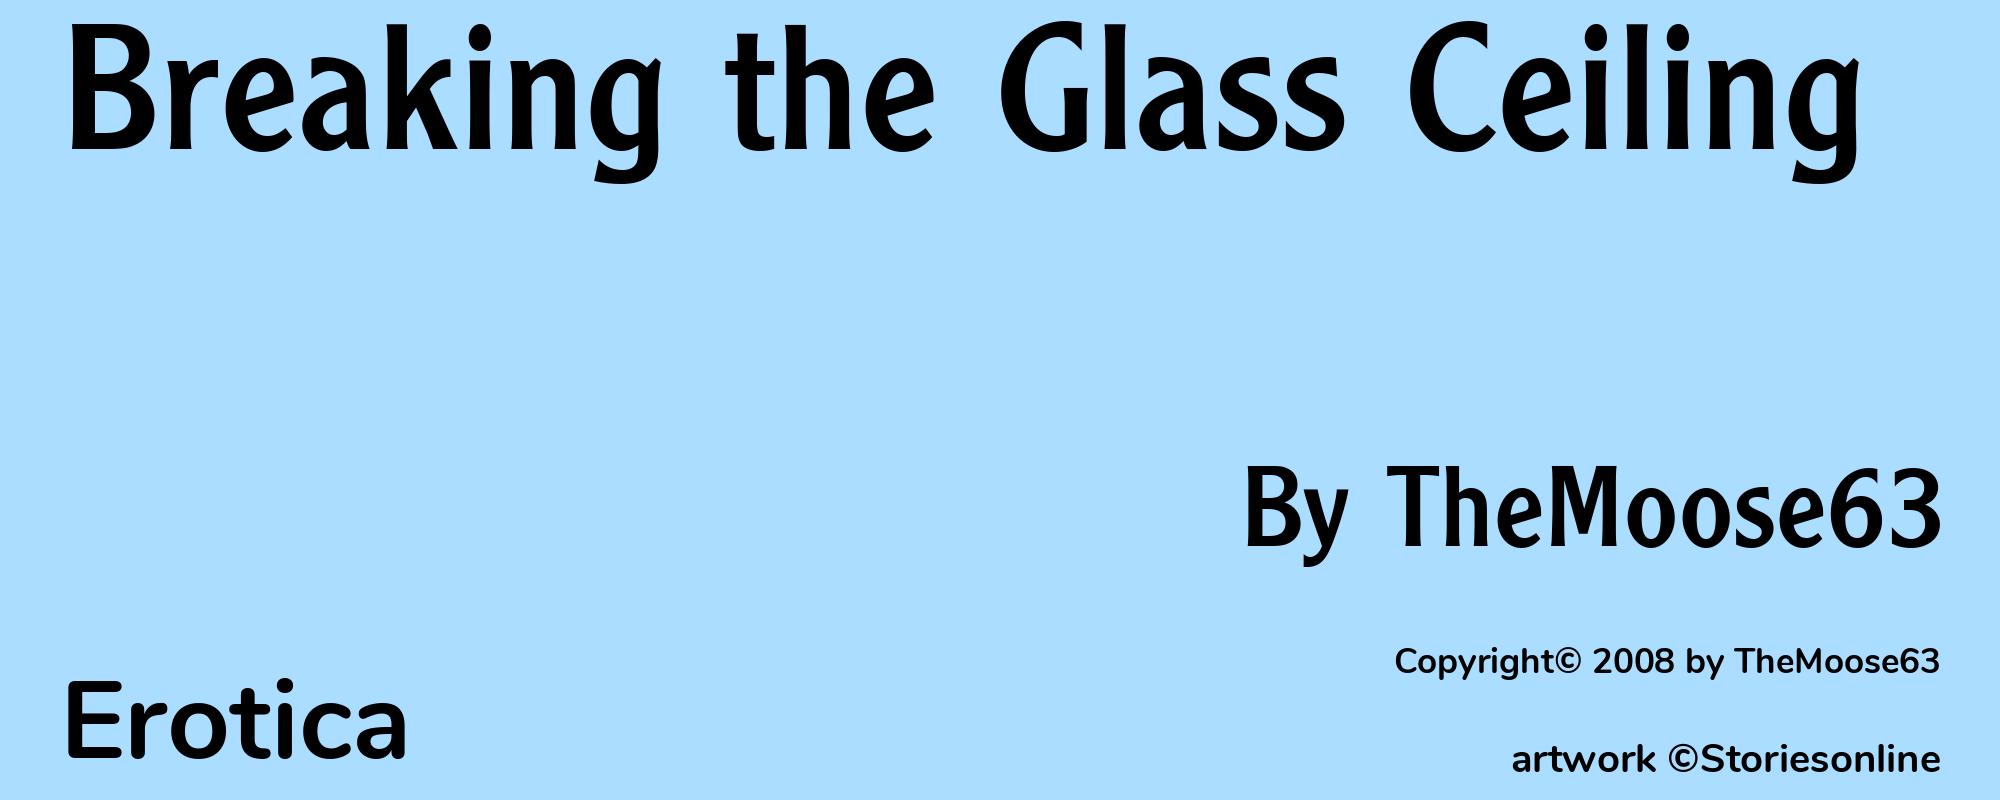 Breaking the Glass Ceiling - Cover